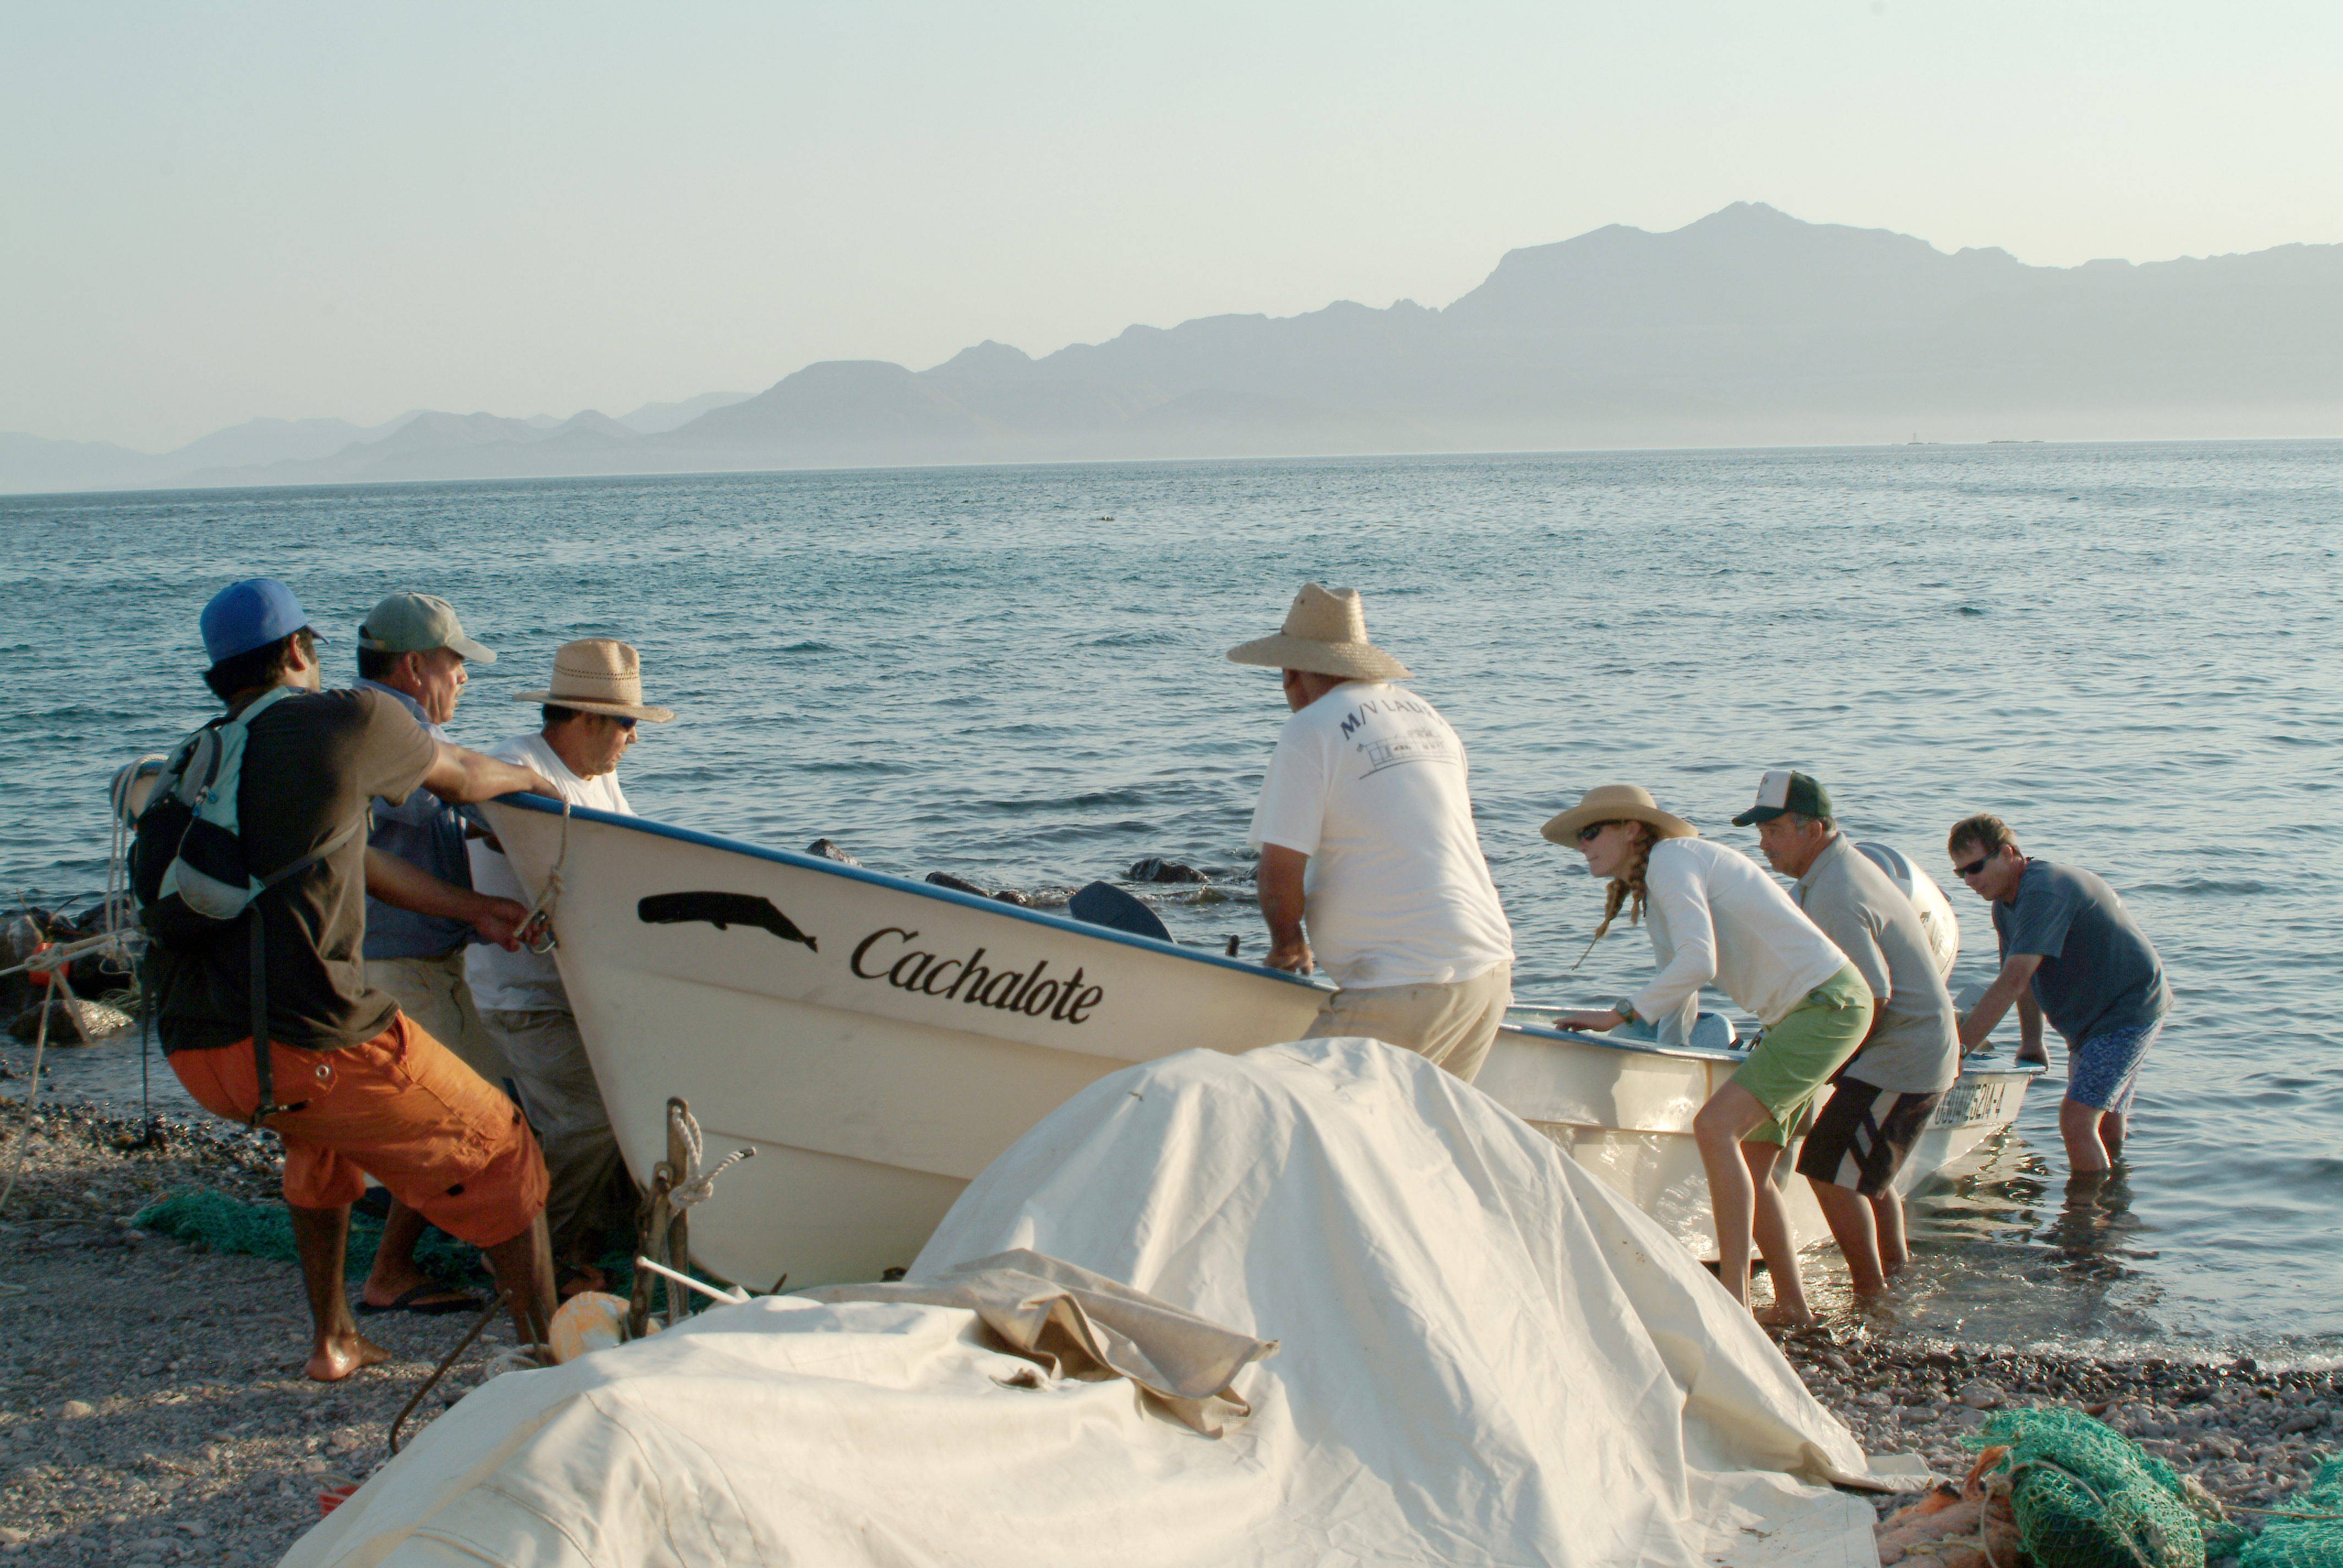 Pangas are the type of small sturdy boat used everywhere in Baja California. They 